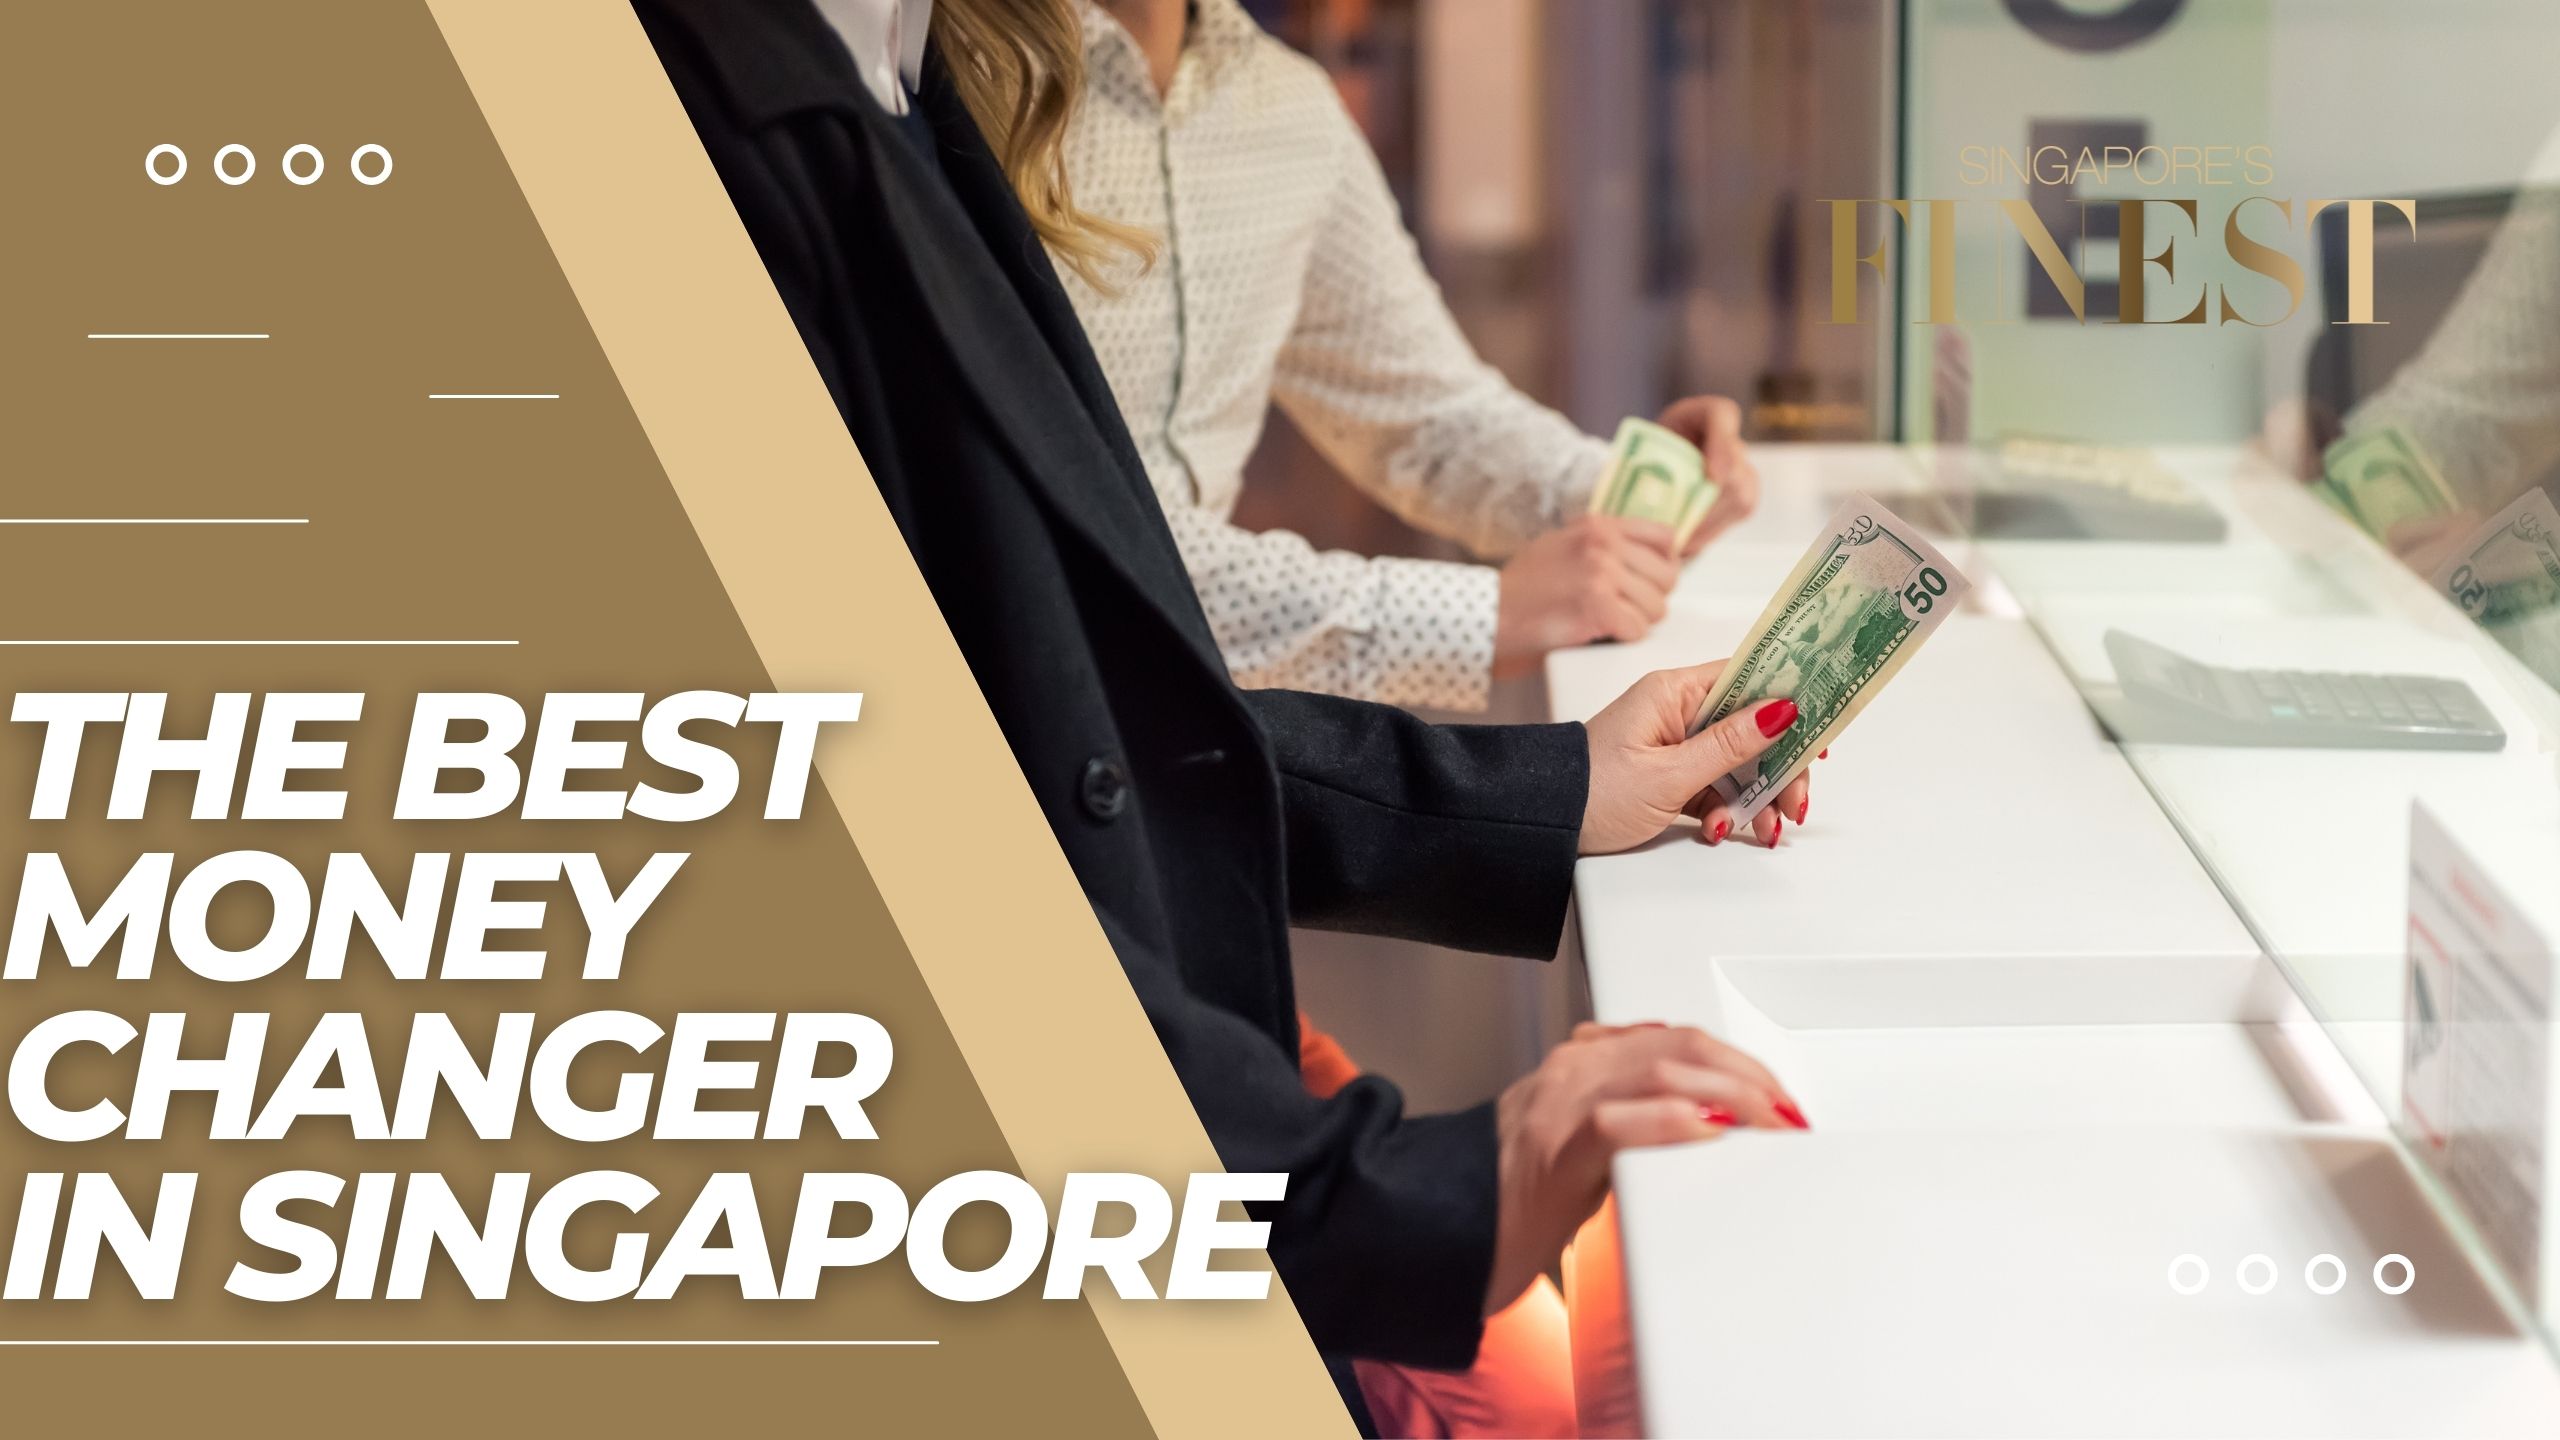 The Finest Money Changer in Singapore